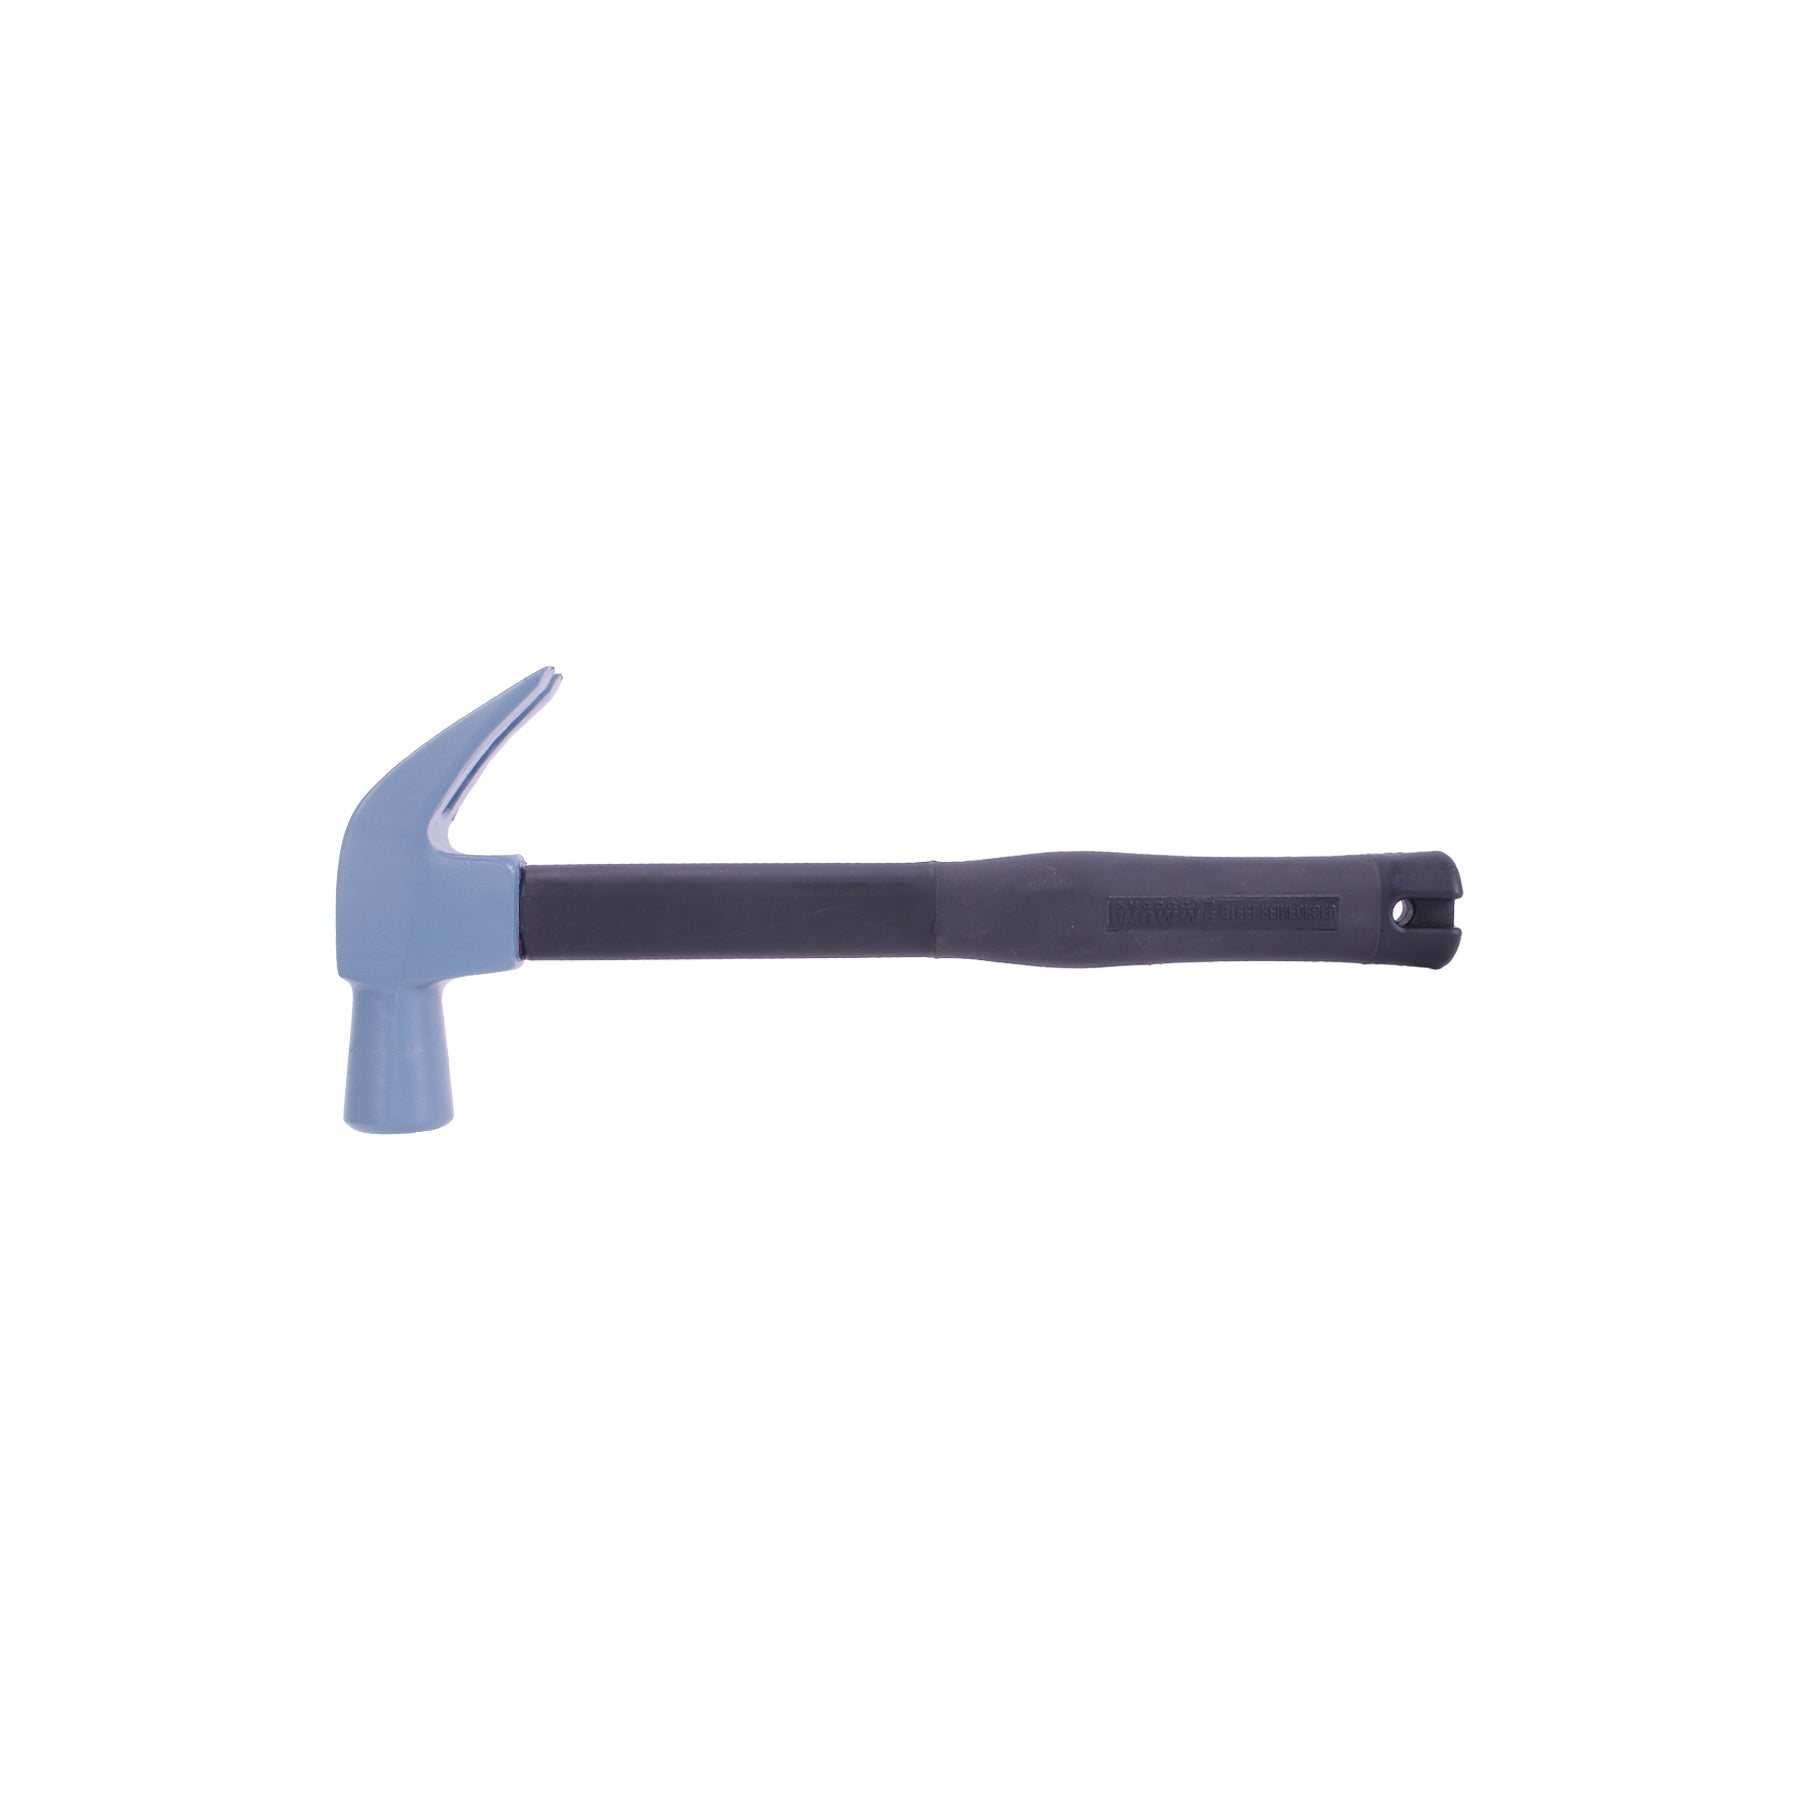 575g Normalised Claw Hammer with 350mm Steel Core Fibreglass Handle 7HCLNFRH0.575 by Mumme